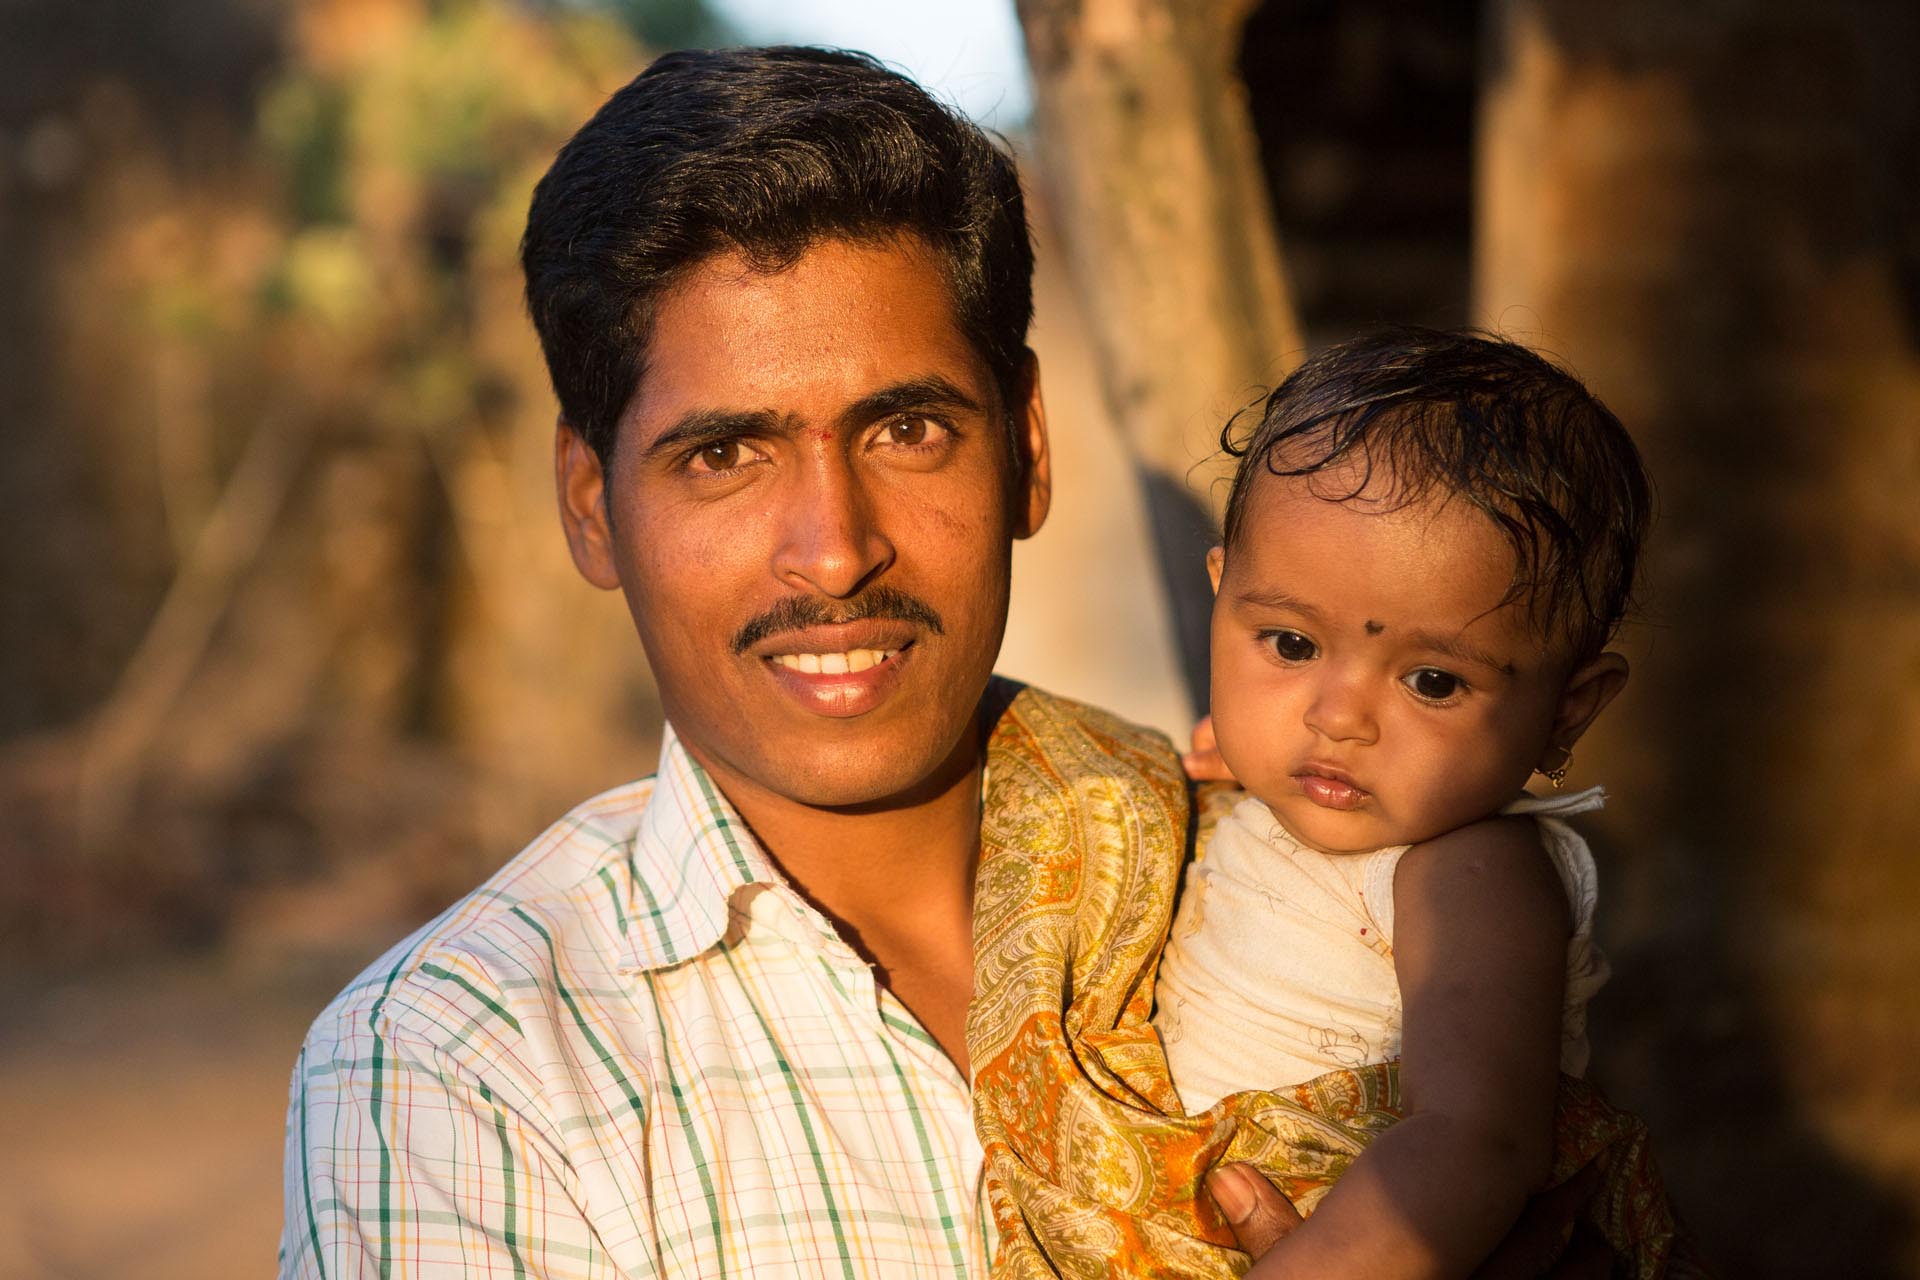 Indian man with his child on his arms